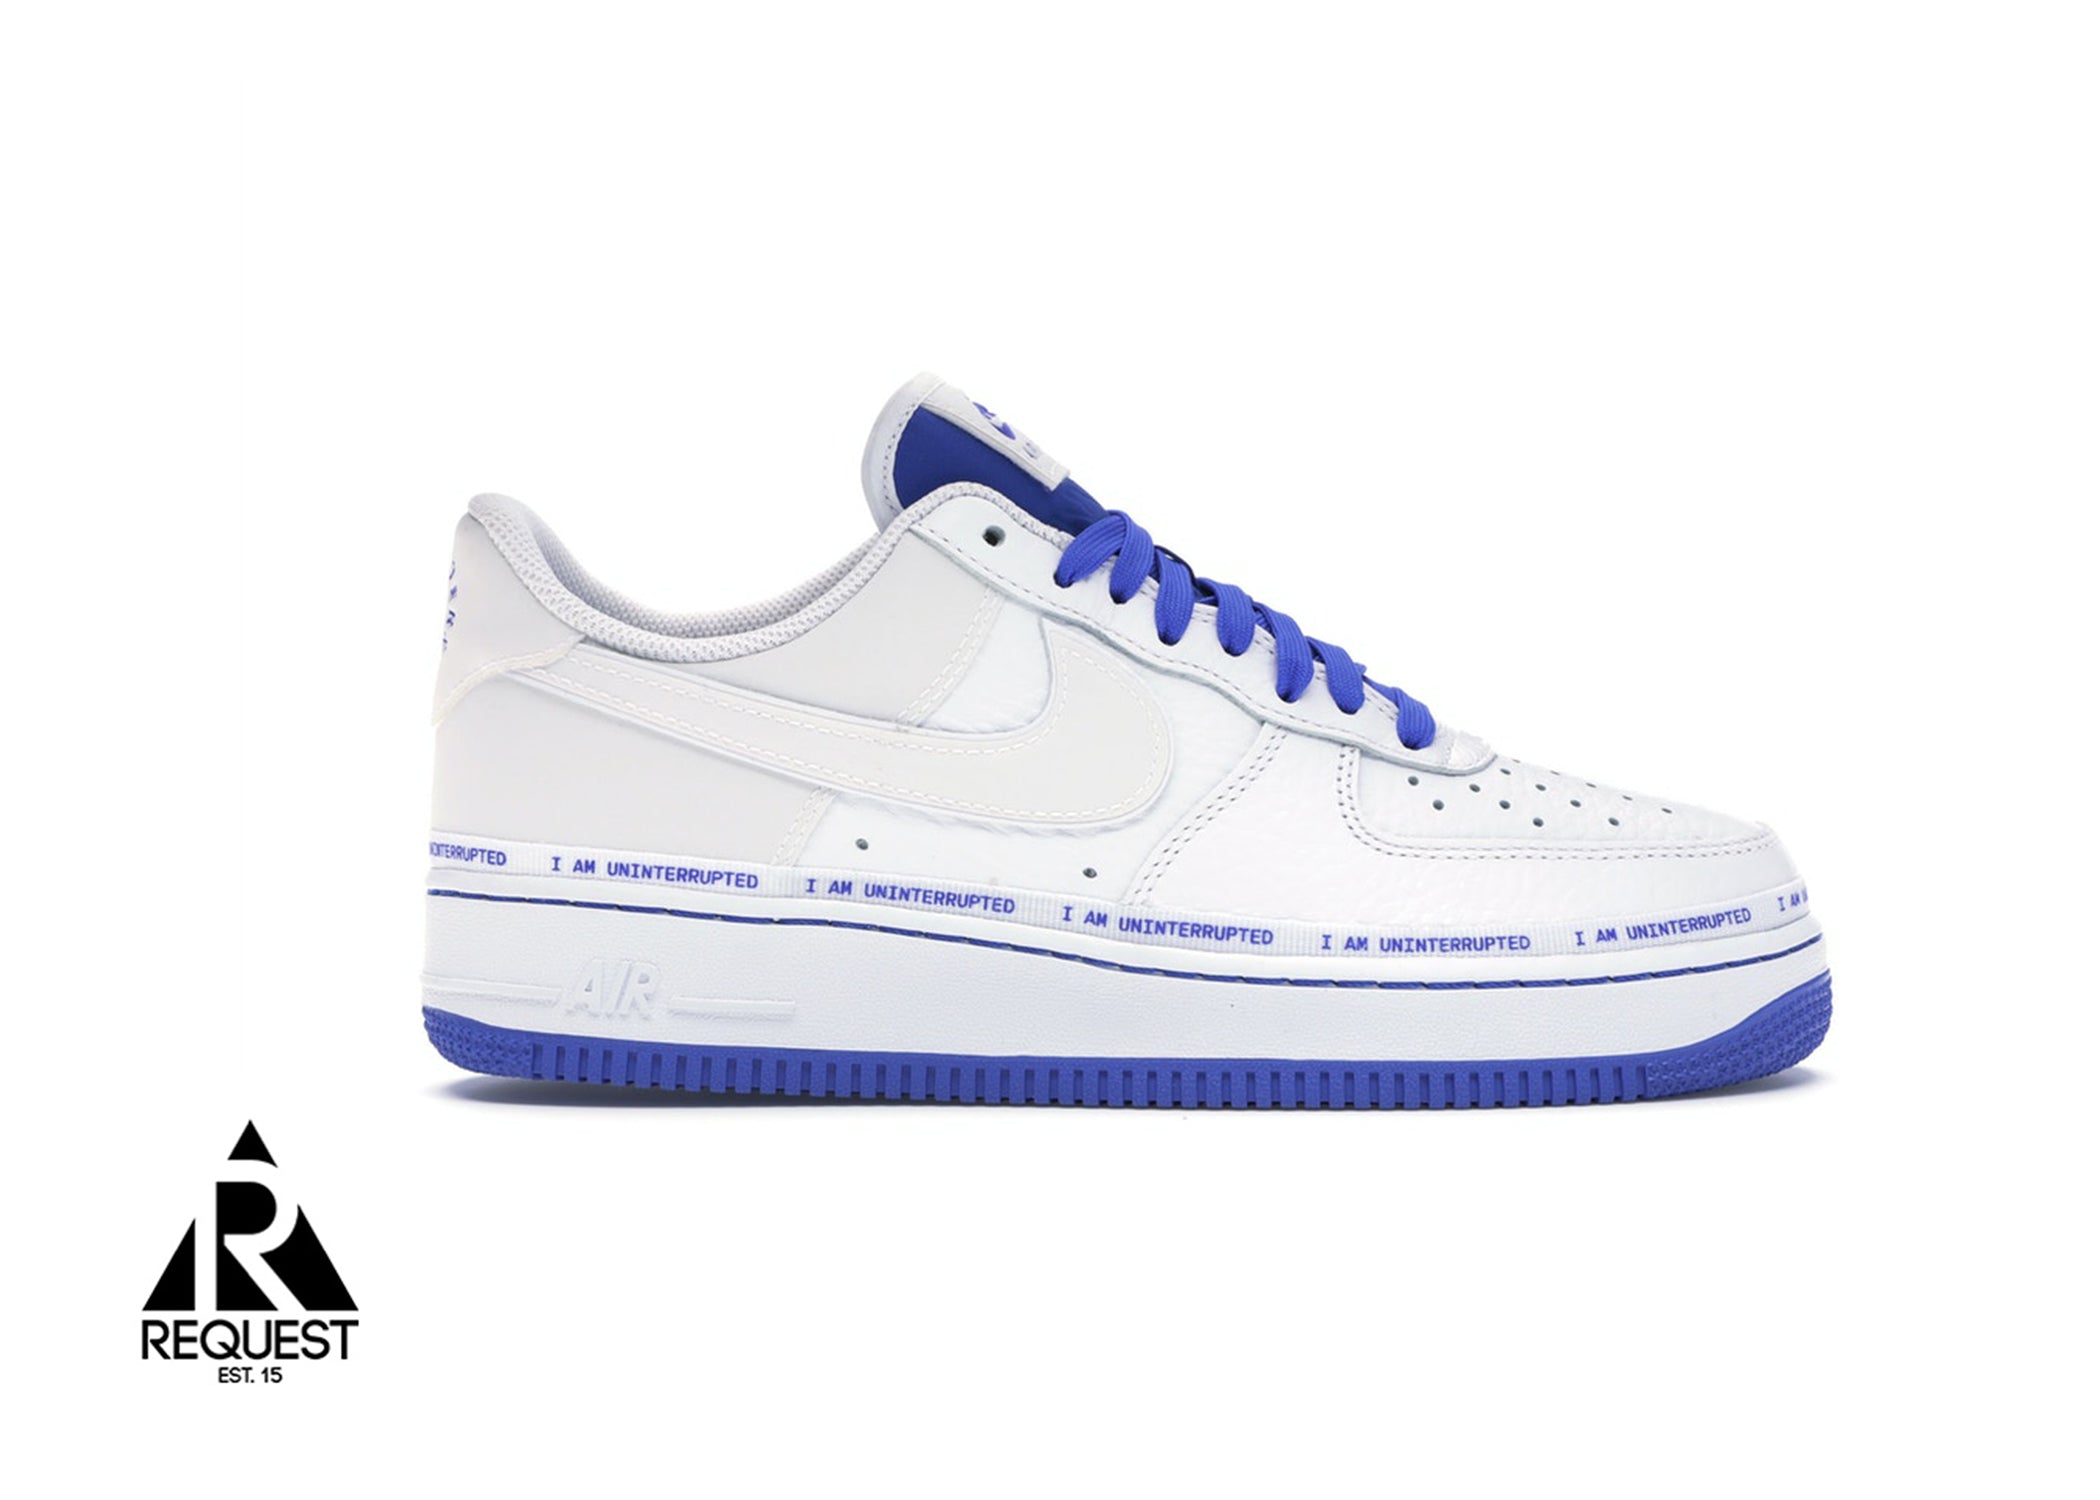 Nike Air Force 1 “Uninterrupted”